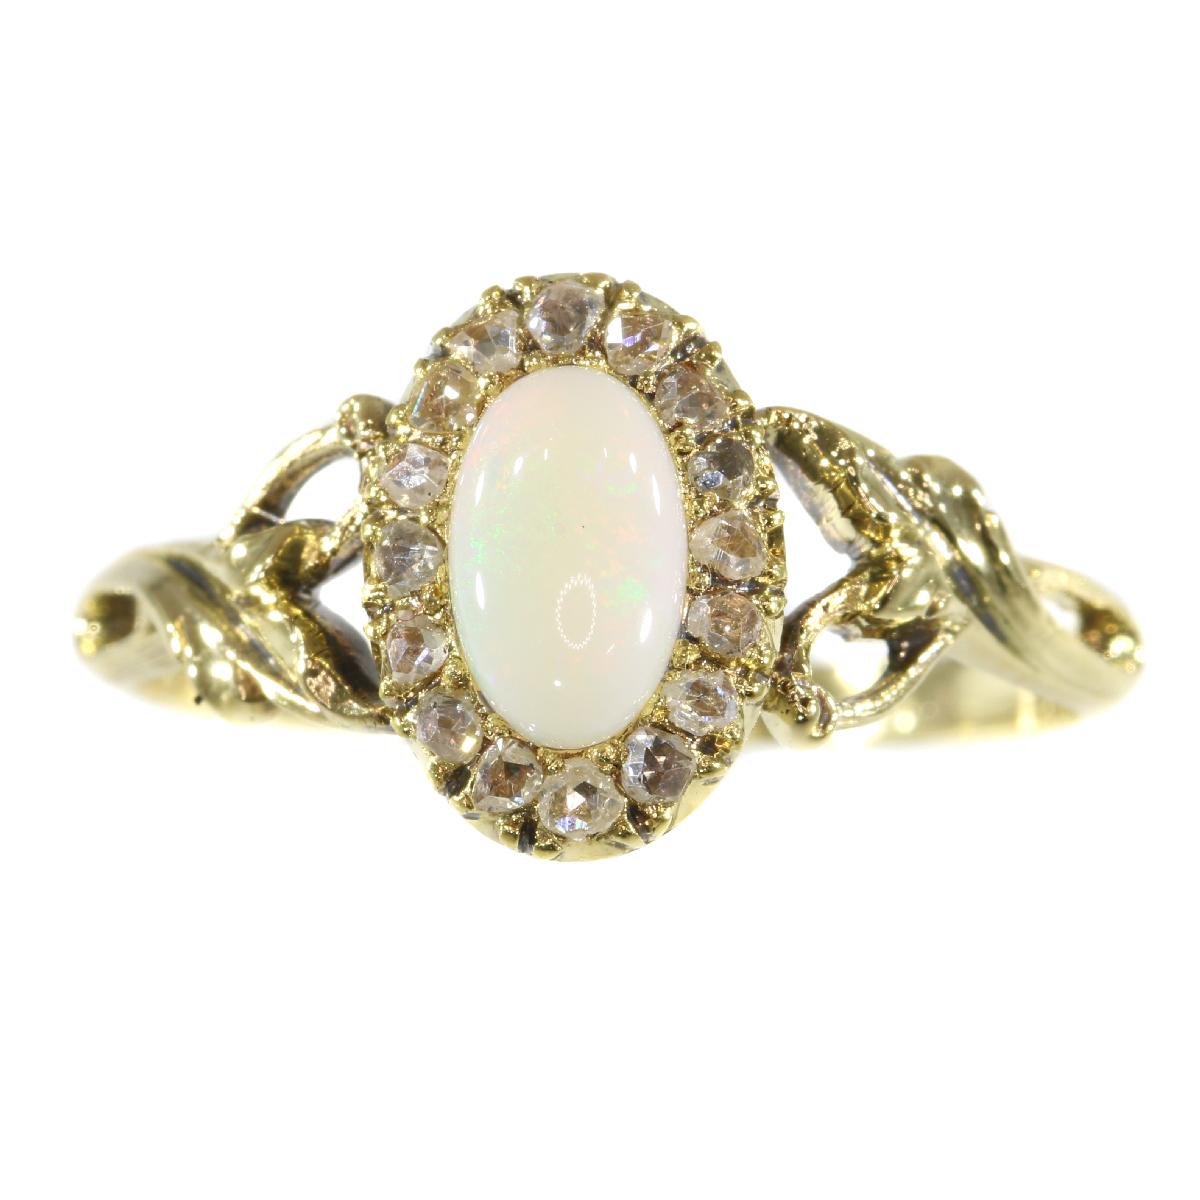 Antique jewelry object group: ring

Condition: excellent condition

Ring size Continental: 61 & 19½ , Size US 9½ , Size UK: S½
- Free resizing (only for extreme resizing we have to charge).

Do you wish for a 360° view of this unique jewel?
Just